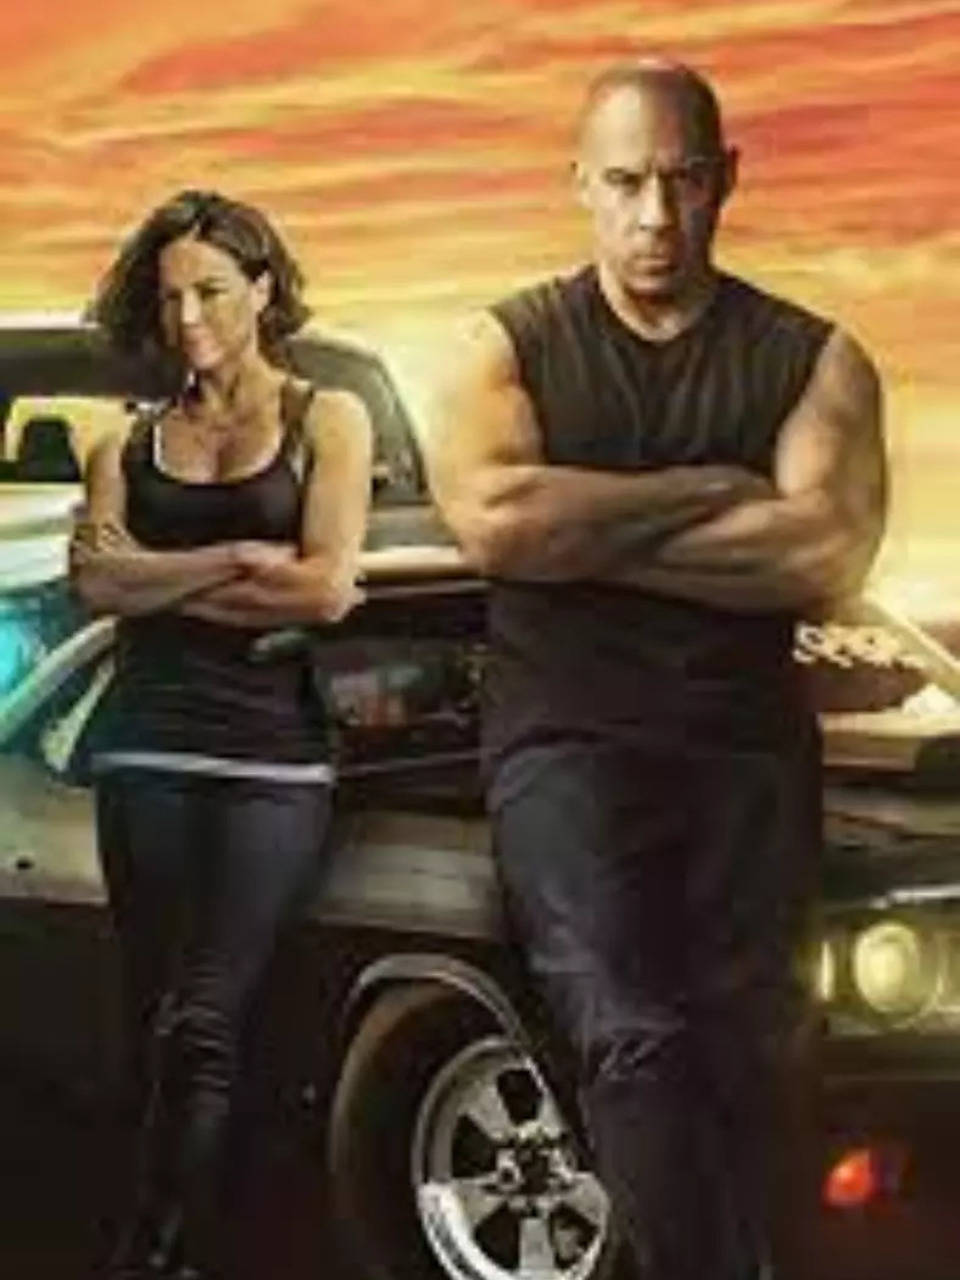 All you need to know about 'The Fast and the Furious' franchise ...